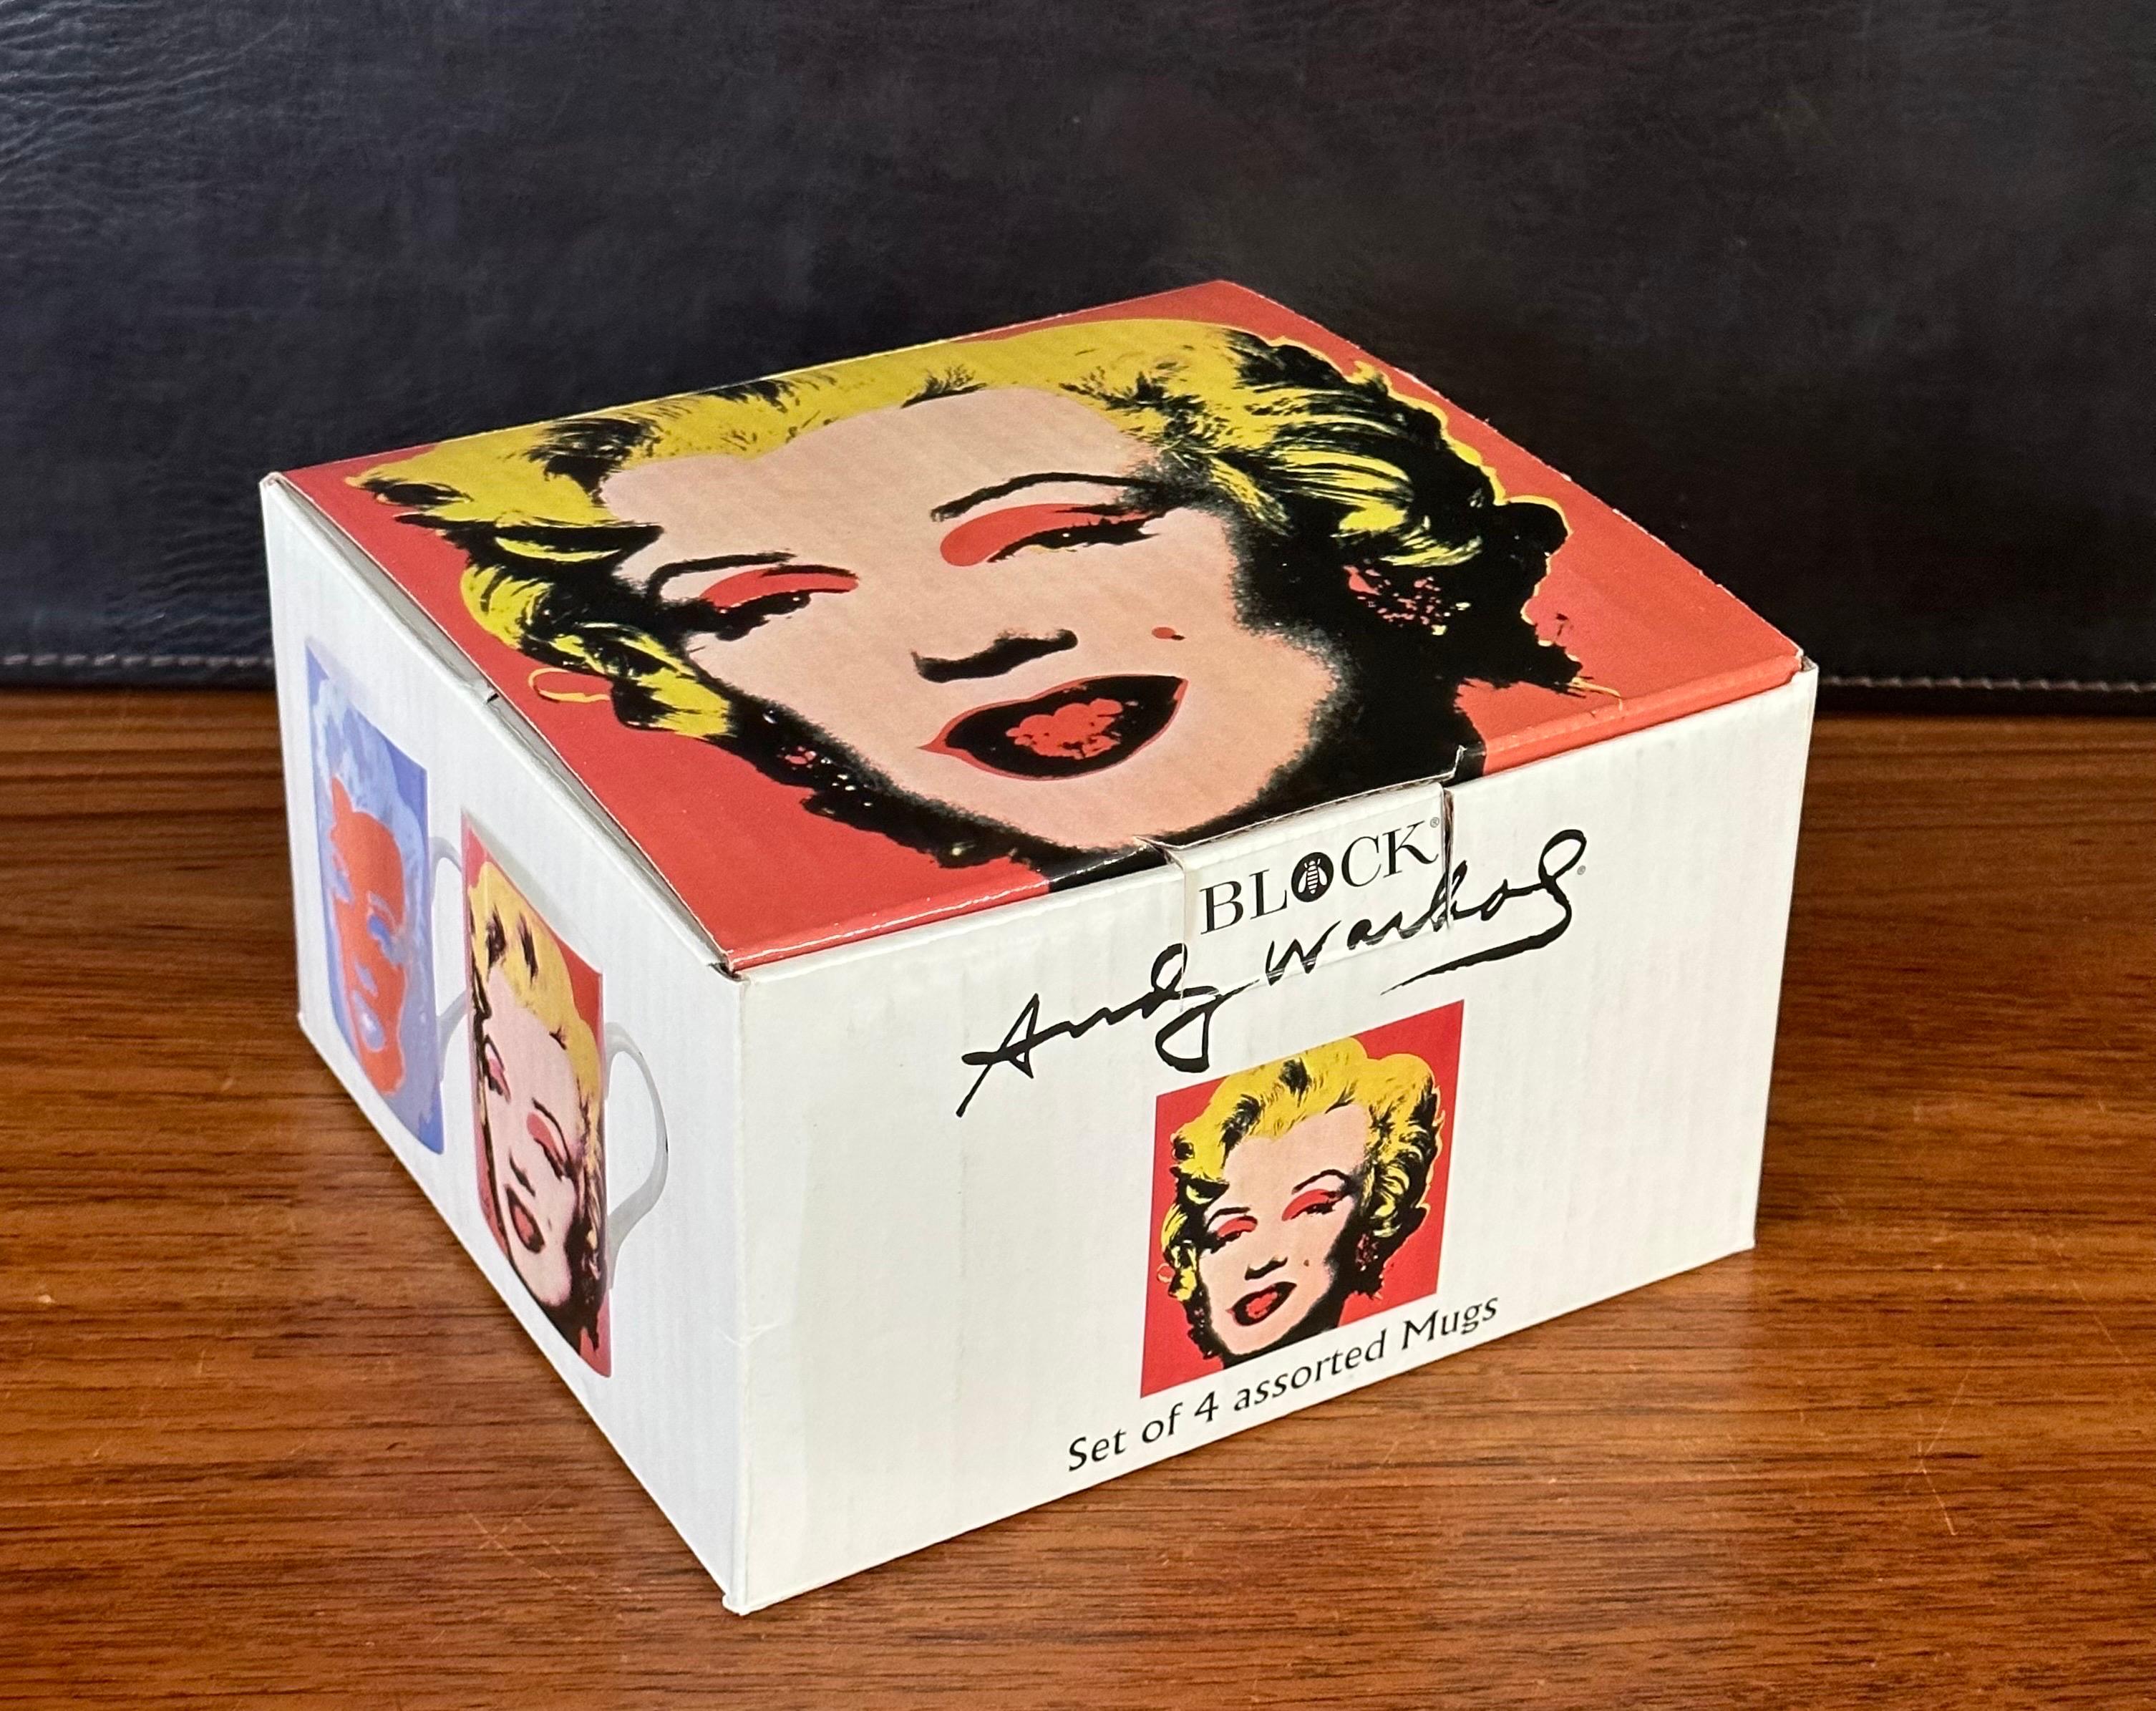 Set of Four Marilyn Monroe Ceramic Coffee Mugs in Box by Andy Warhol for Block  For Sale 8